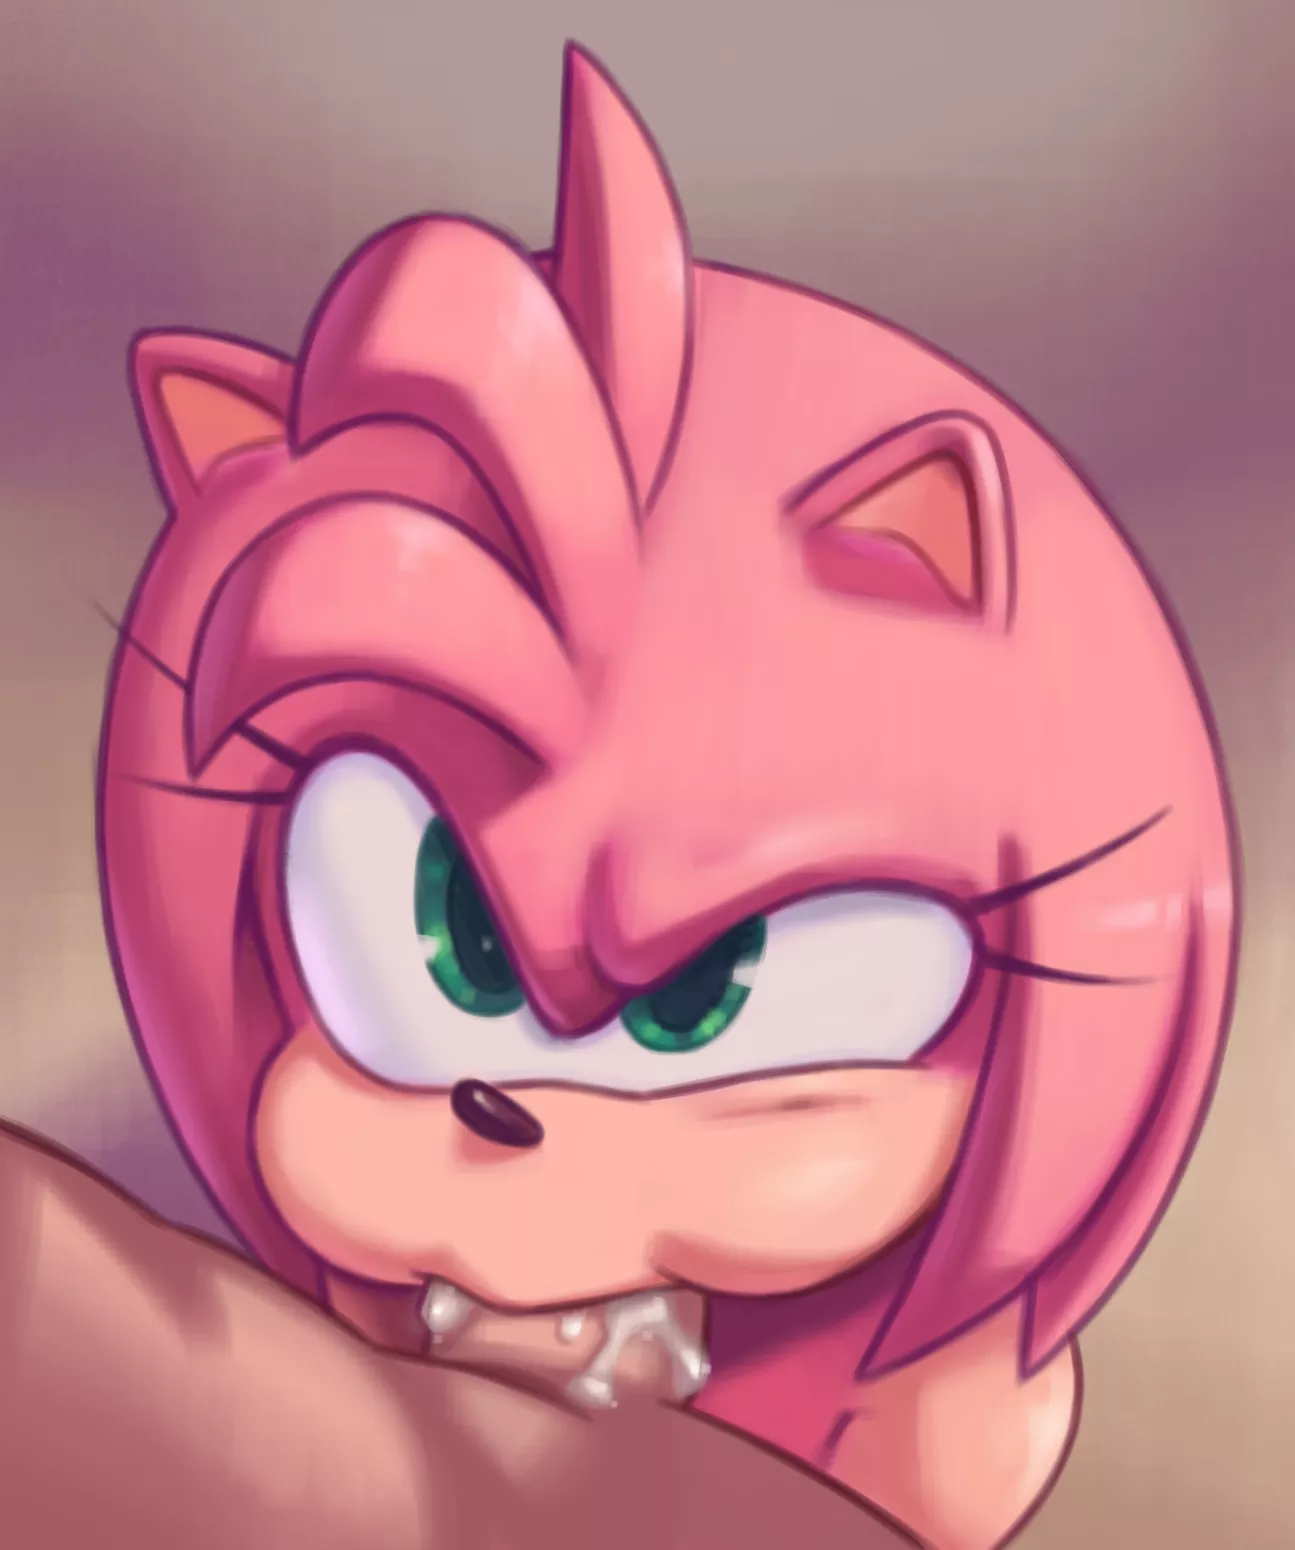 sonic the hedgehog and amy rose (sonic) drawn by lightsource | Danbooru